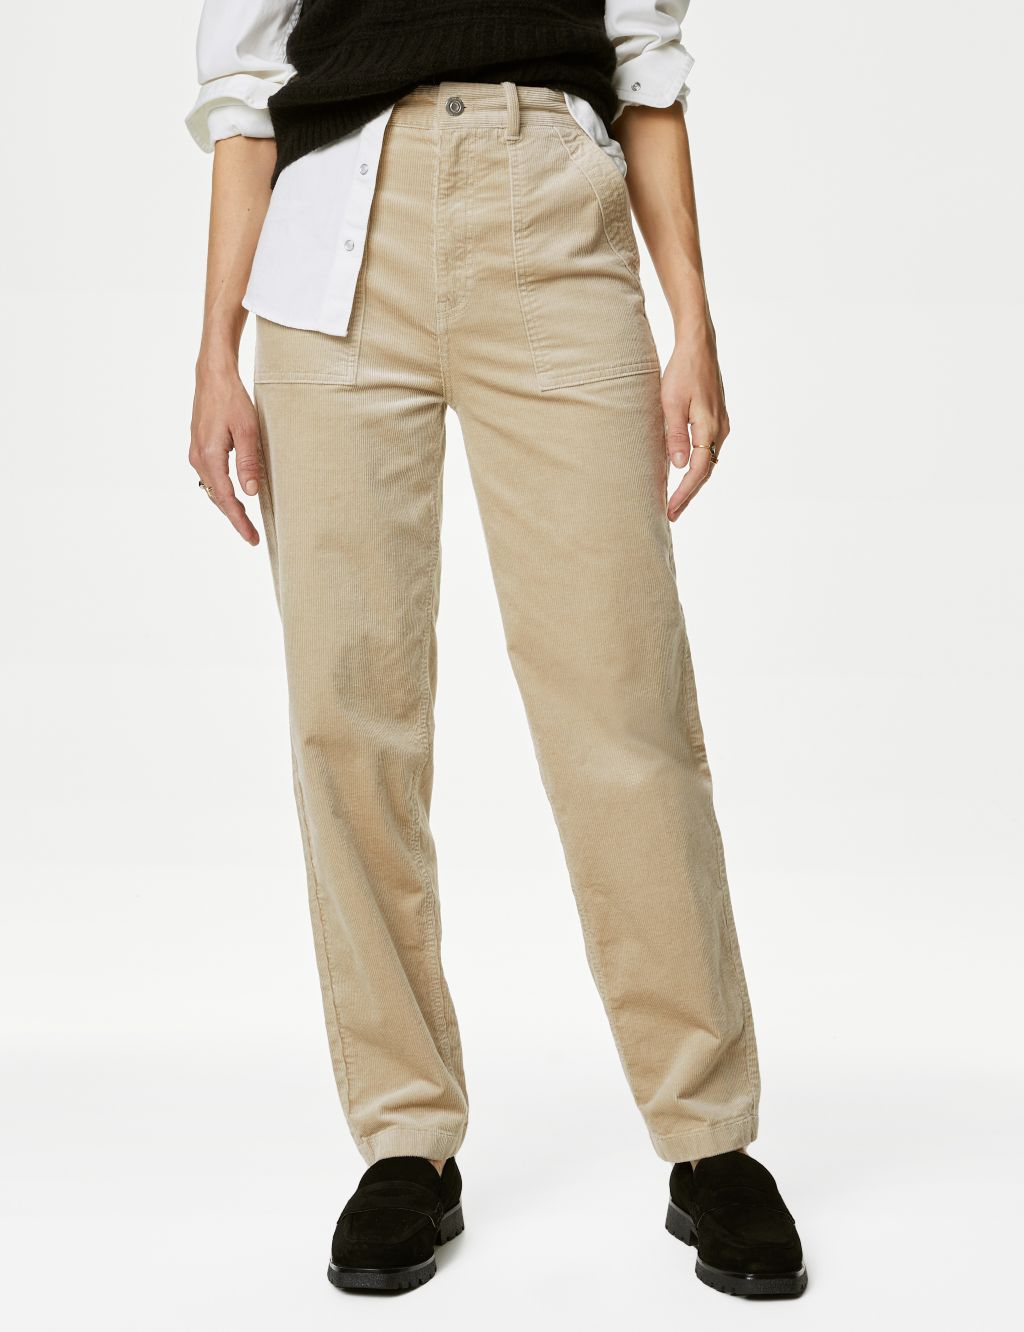 Corduroy Tapered Ankle Grazer Trousers image 3